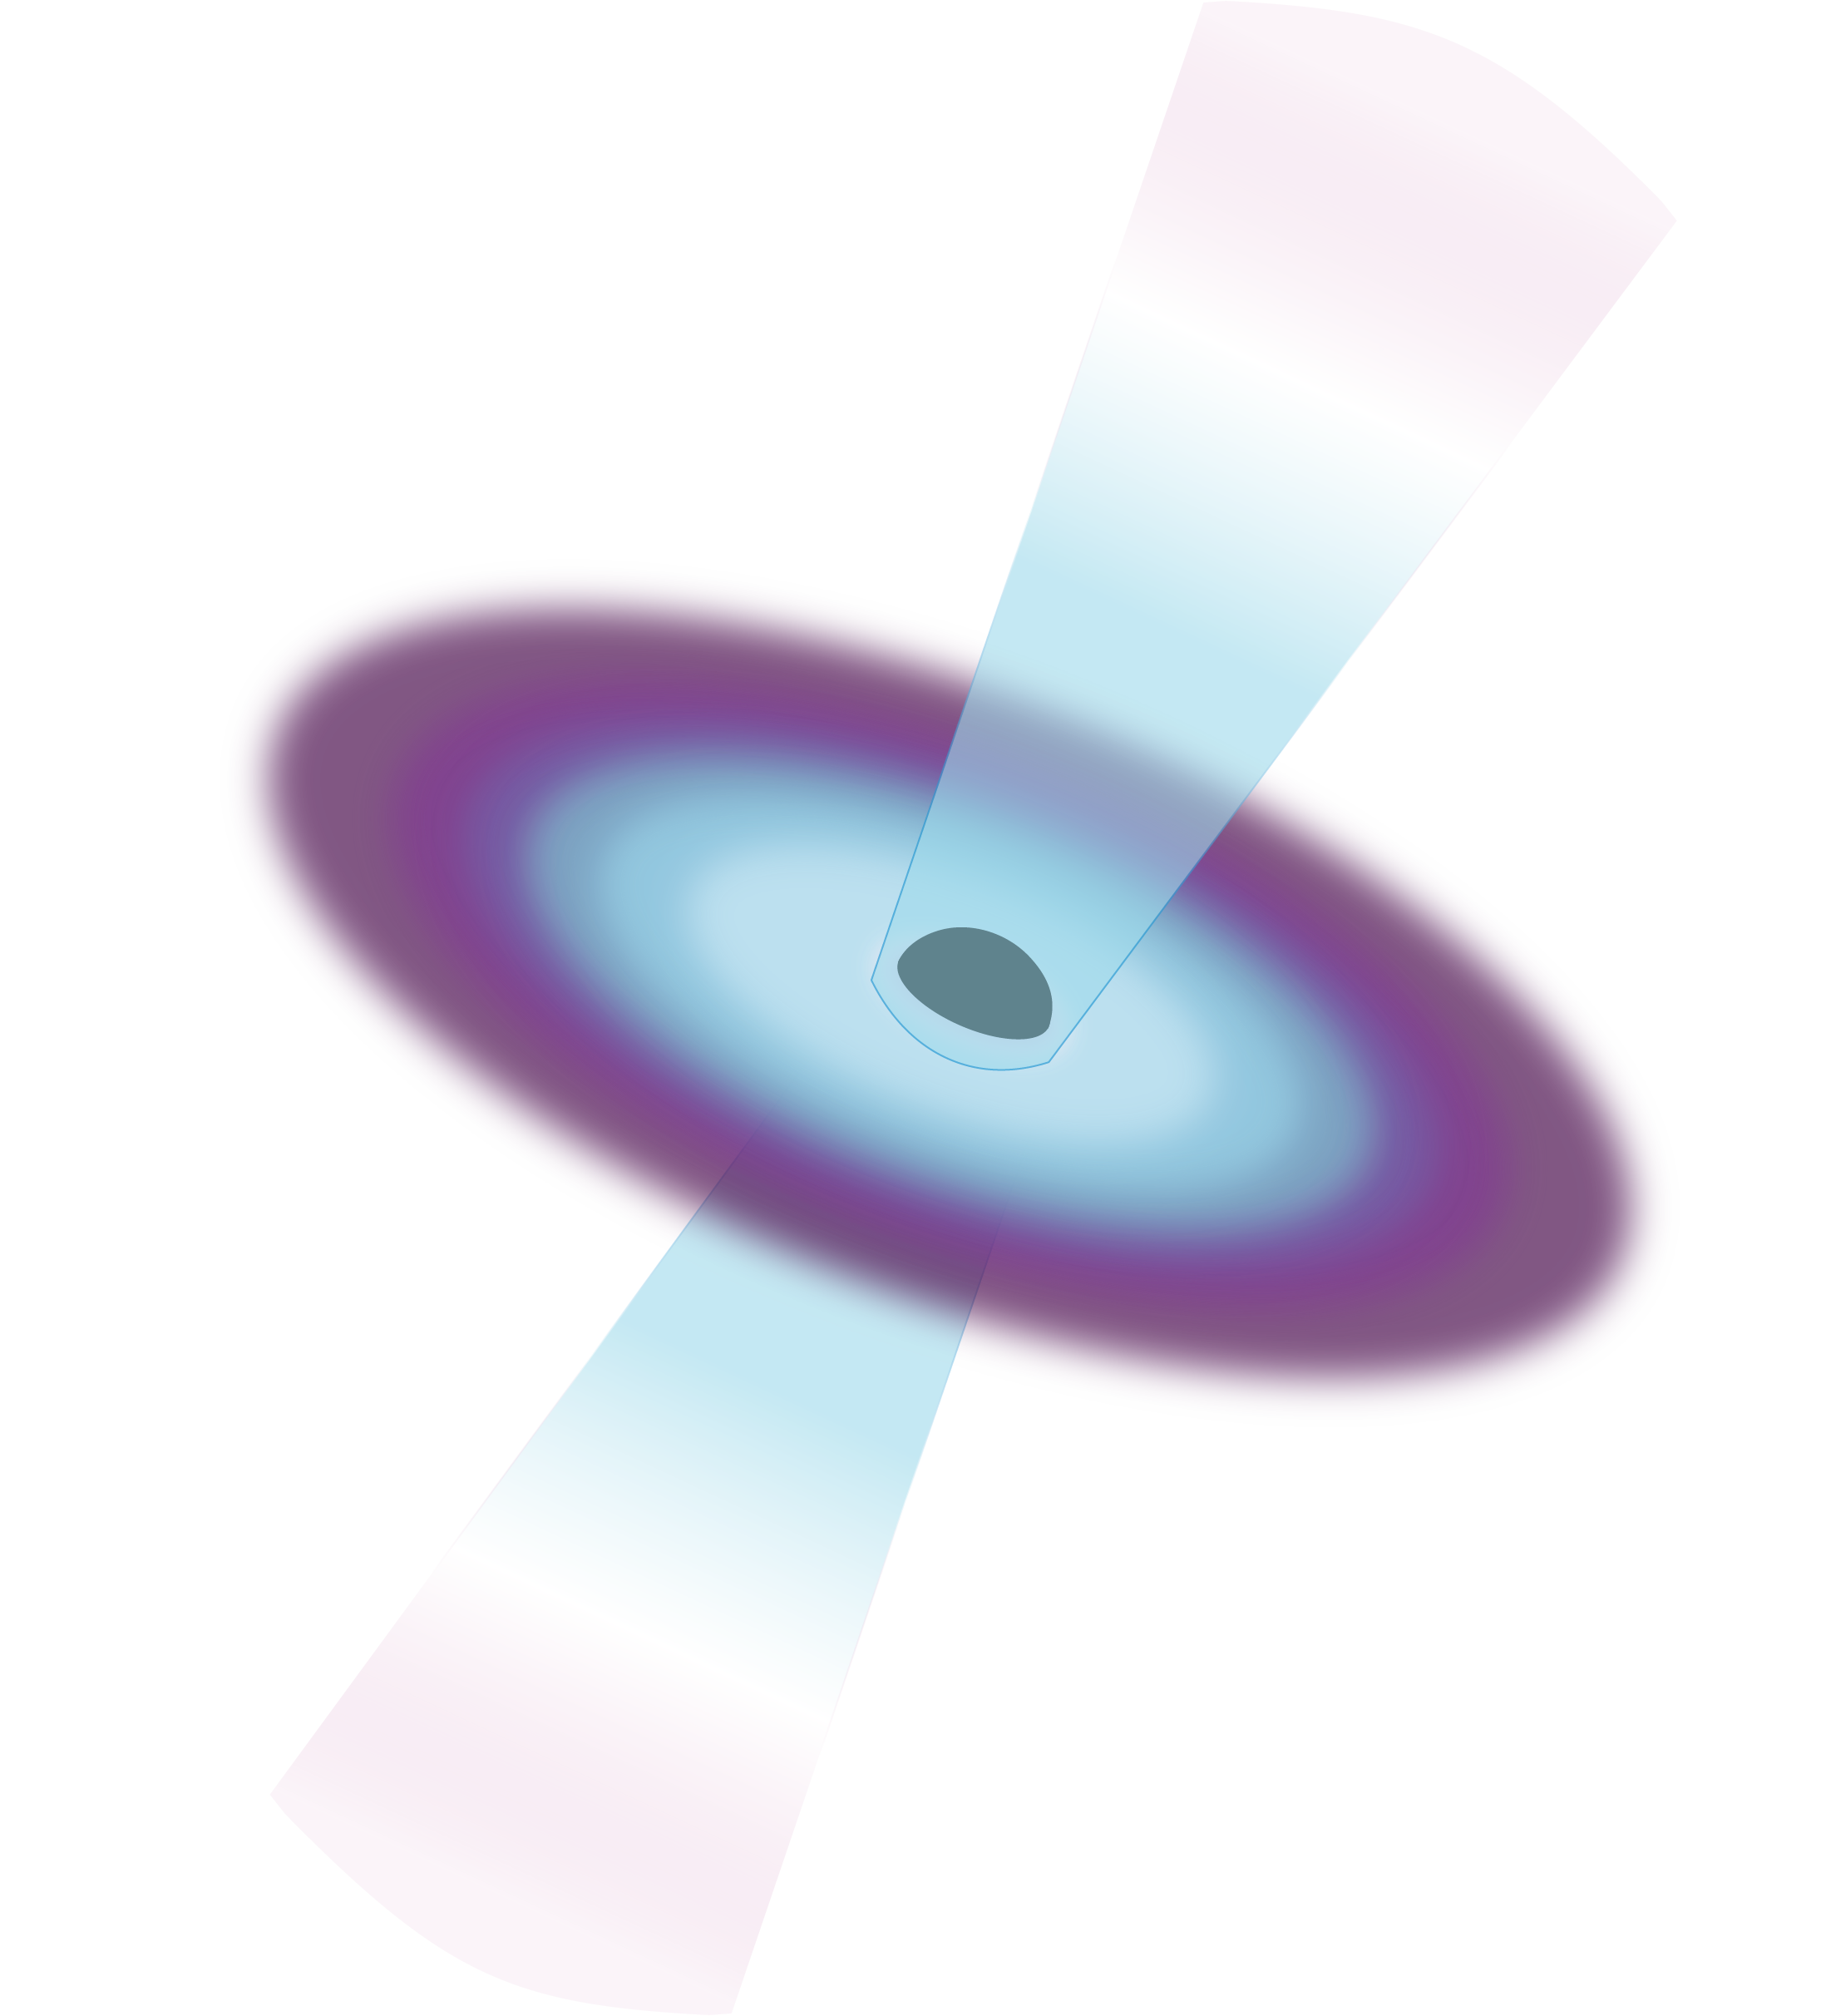 A graphic shows a tilted disc in the center. A dark, diffuse purple ring lines its outer edge. The dark purple fades inward to a bright purple, light blue, and then lighter until it reaches the center where there is a black spot. From both the top and bottom of the disk's center, an icy light blue beam shoots out.